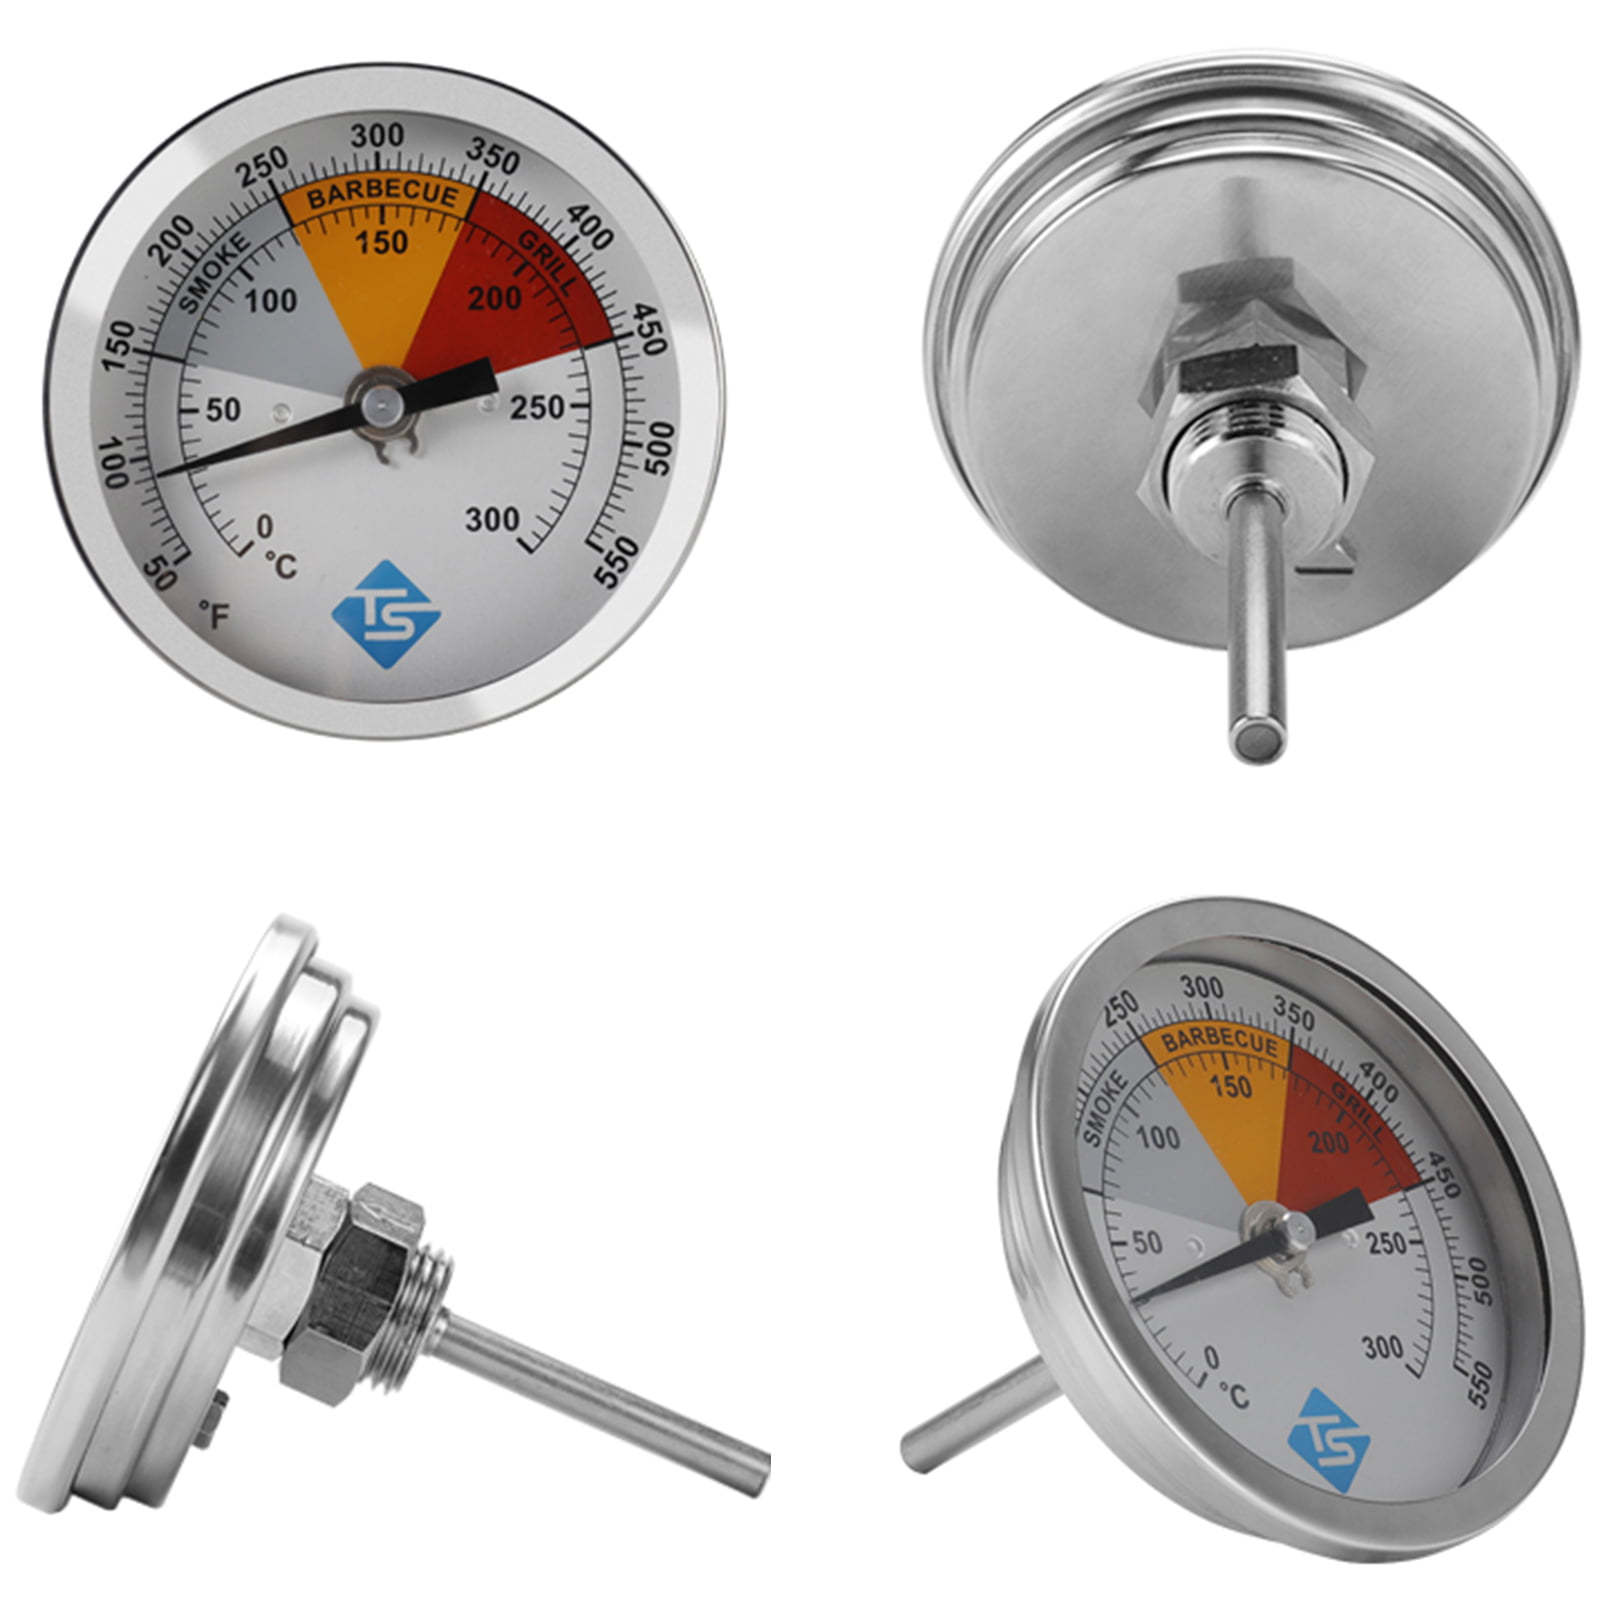 Barbecue smoker grill thermometer temperature gauge 300℃ 304 stainless steel`HK 